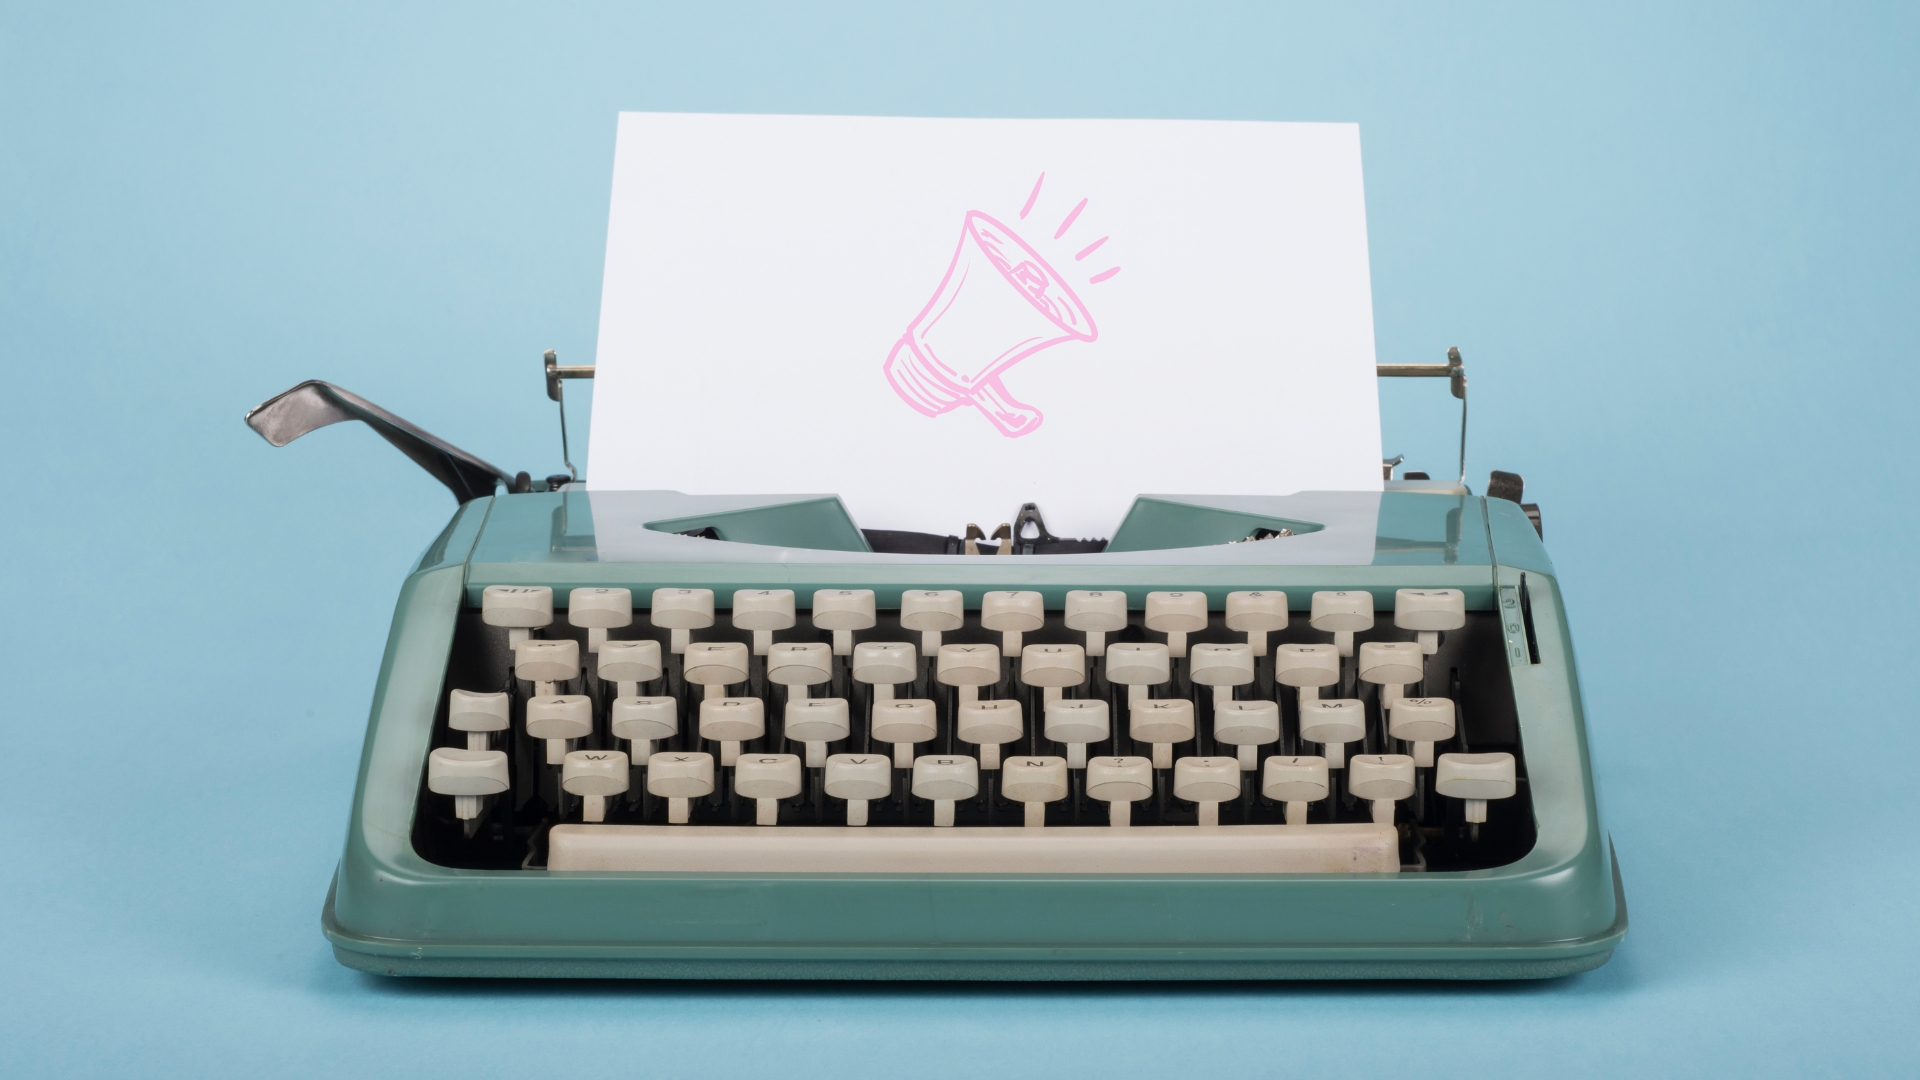 We can't do everything ourselves. Here's how to write a great pitch.